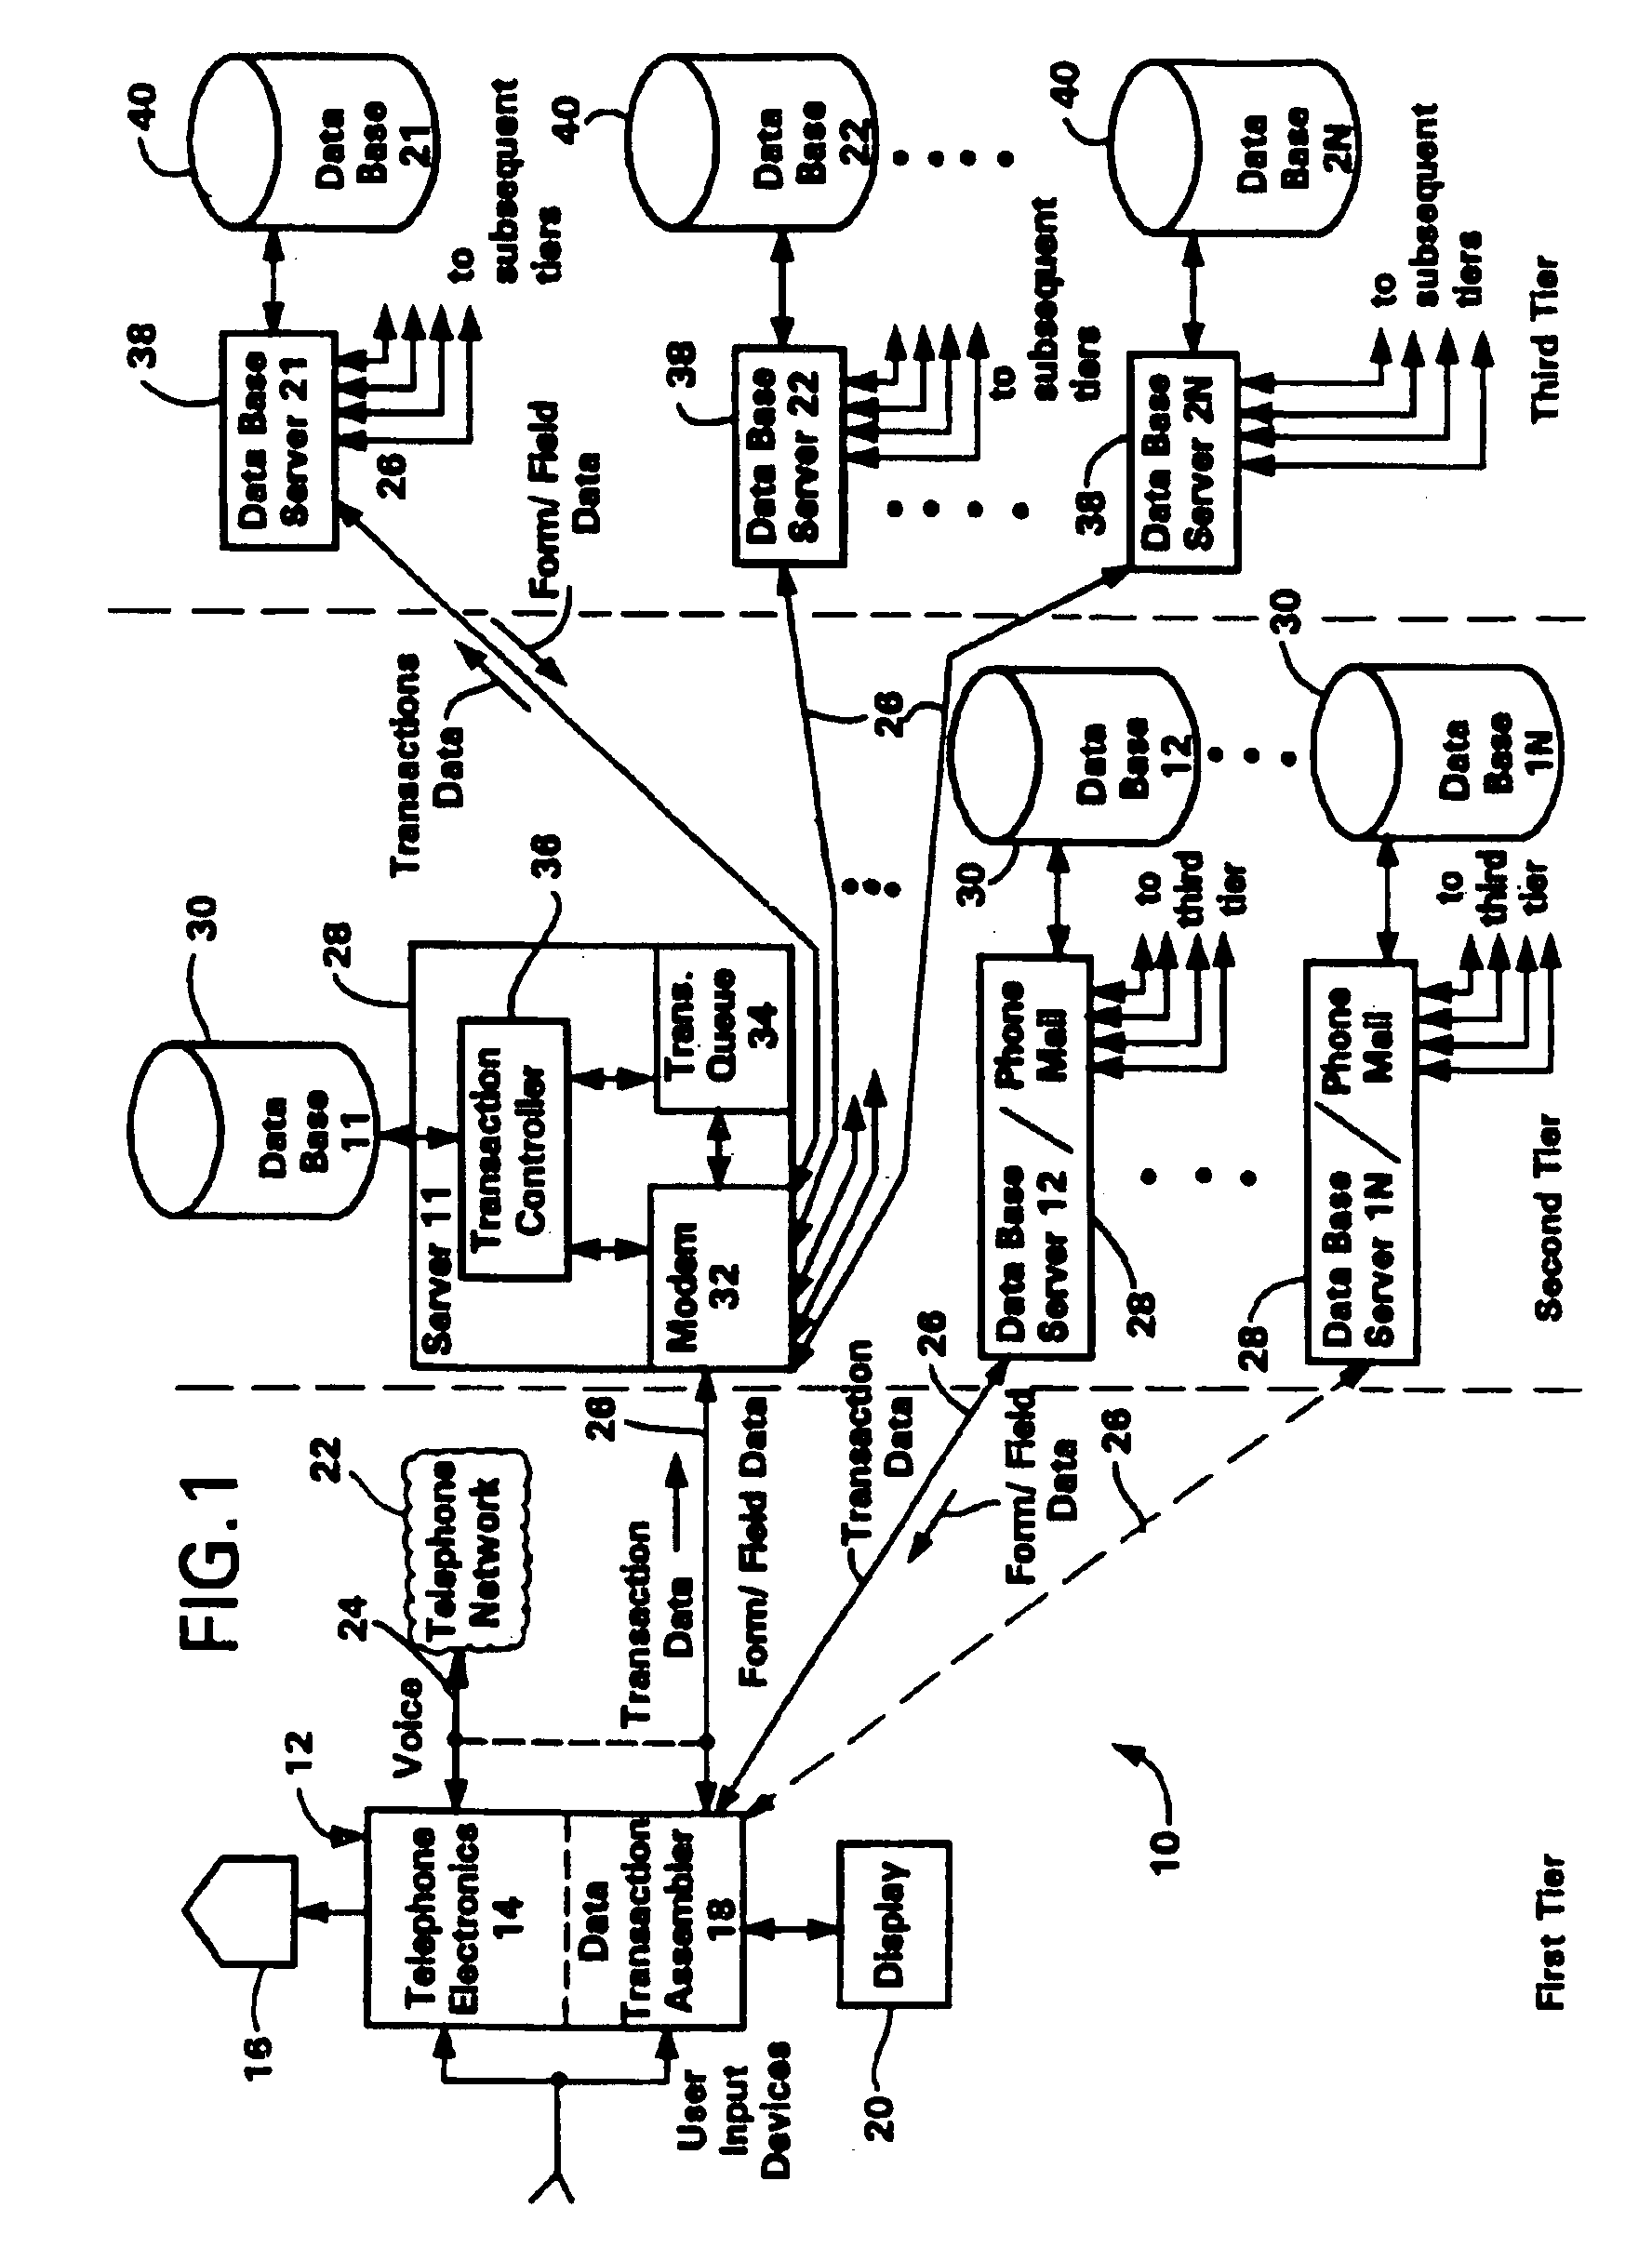 System for securely communicating amongst client computer systems